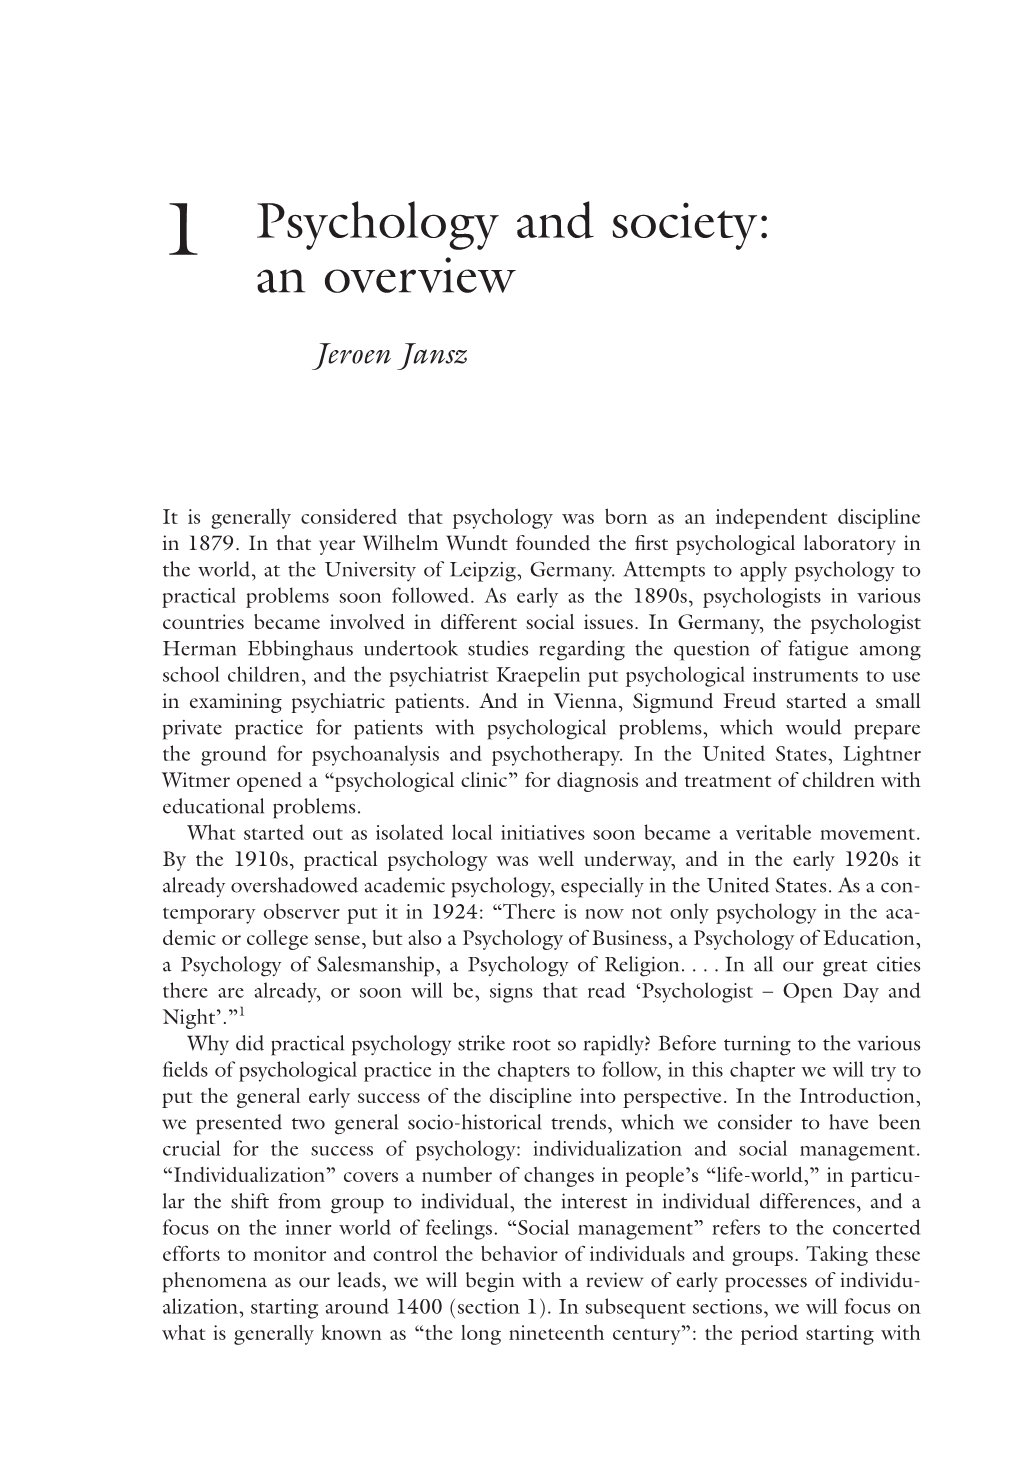 1 Psychology and Society: an Overview